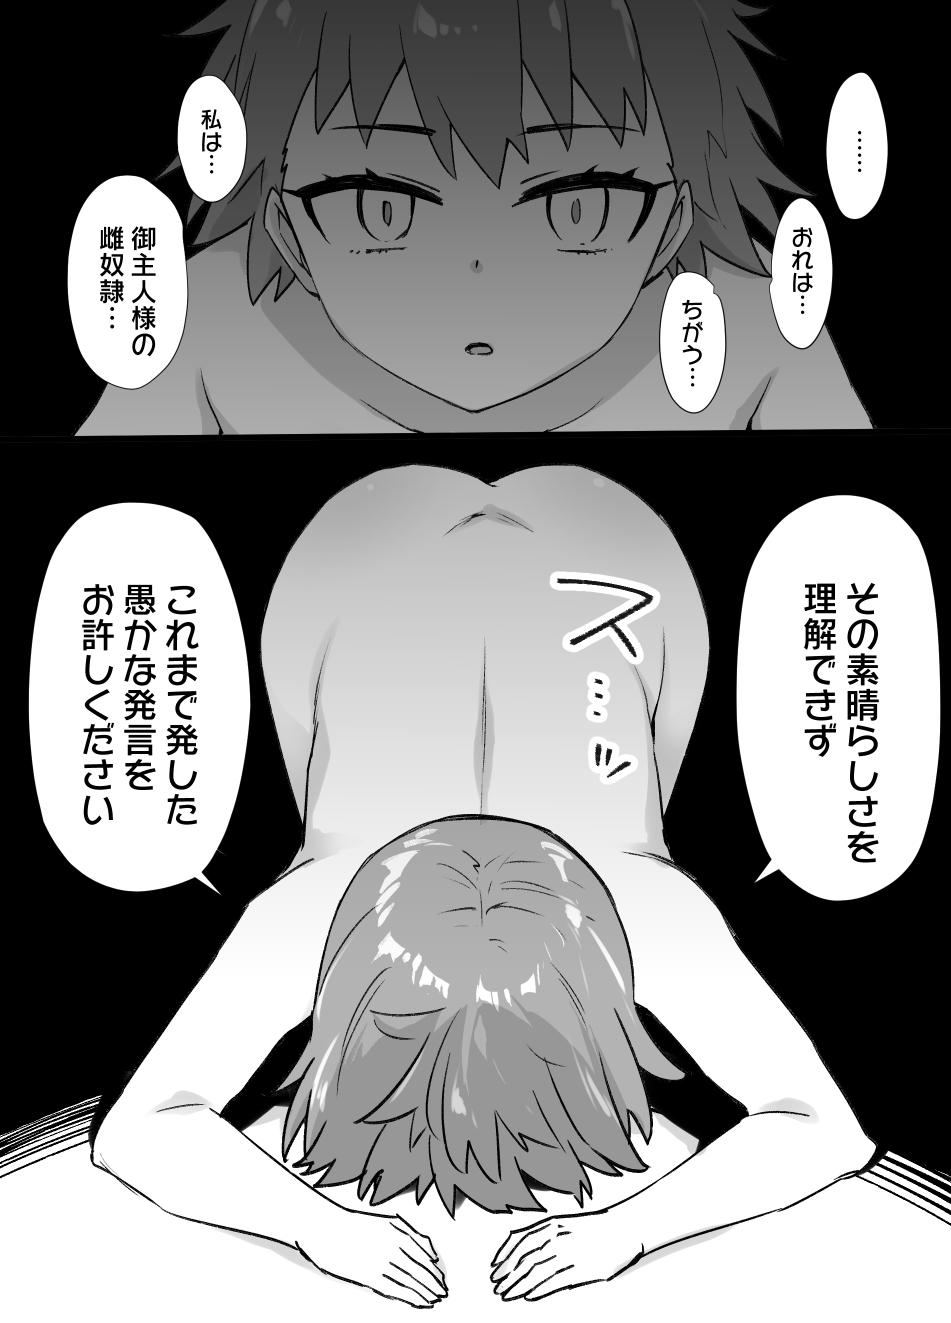 Taboo A manga about Shirou Emiya who went to save Rin Tohsaka from captivity and is transformed into a female slave through physical feminization and brainwashing[Fate/ stay night) - Fate stay night Celeb - Page 6